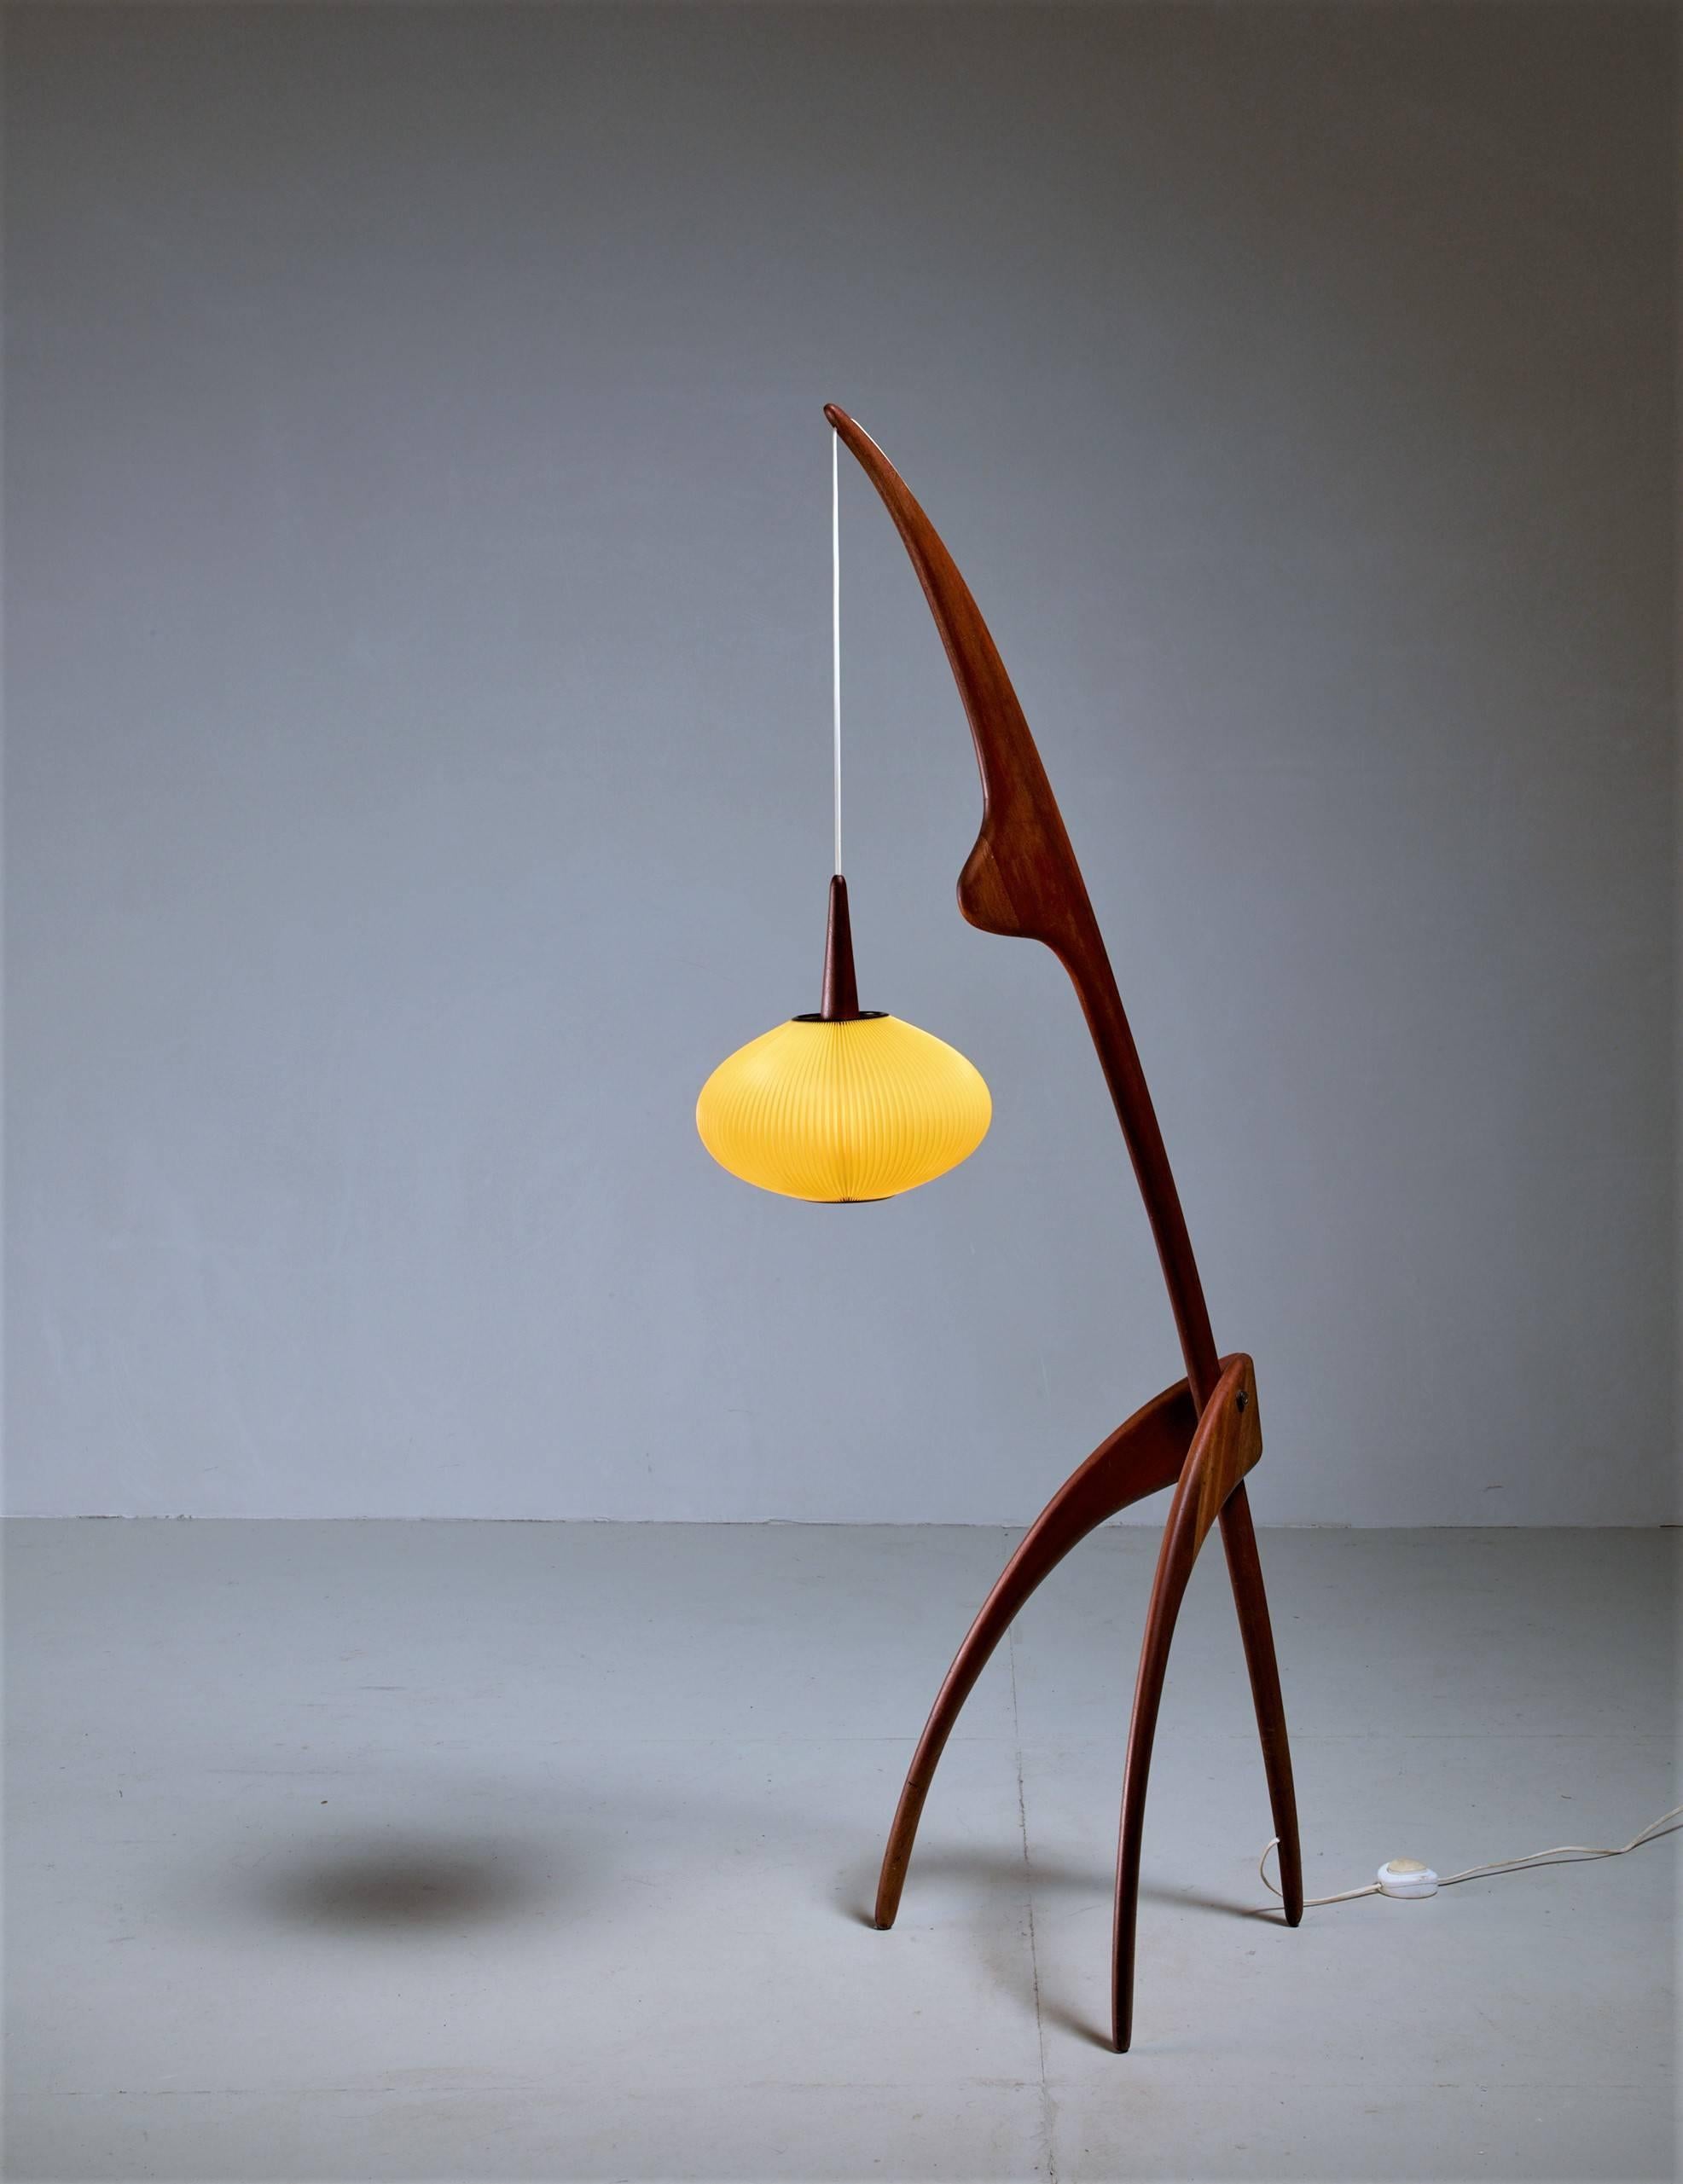 Iconic in its kind, this Rispal floor lamp is a beautiful Classic piece with a sculptural, zoomorphic walnut frame and a yellow celluloid shade.
This model is inspired by the work of artist Jean (Hans) Arp.